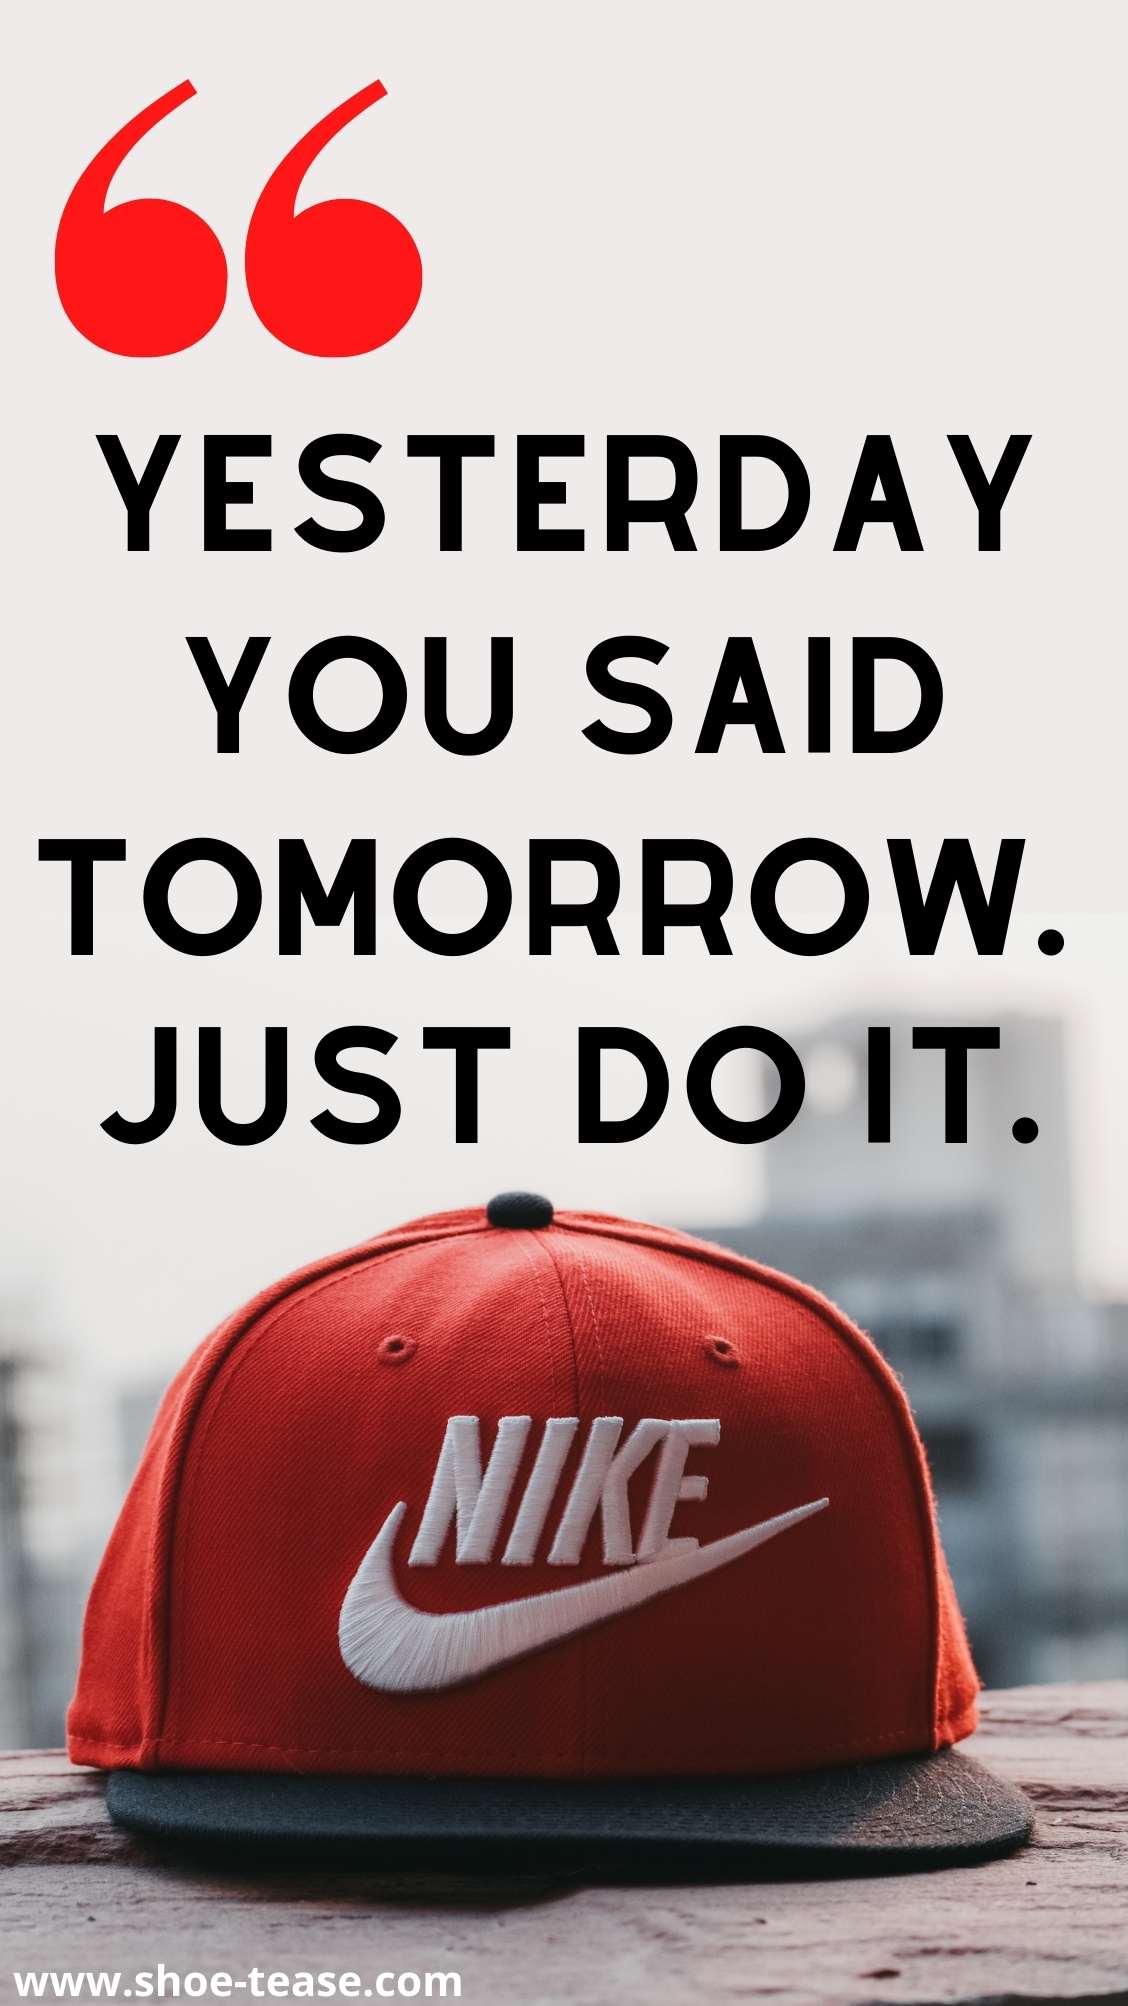 Nike Quote reading Yesterday you said tomorrow. Just do it over a red Nike cap.